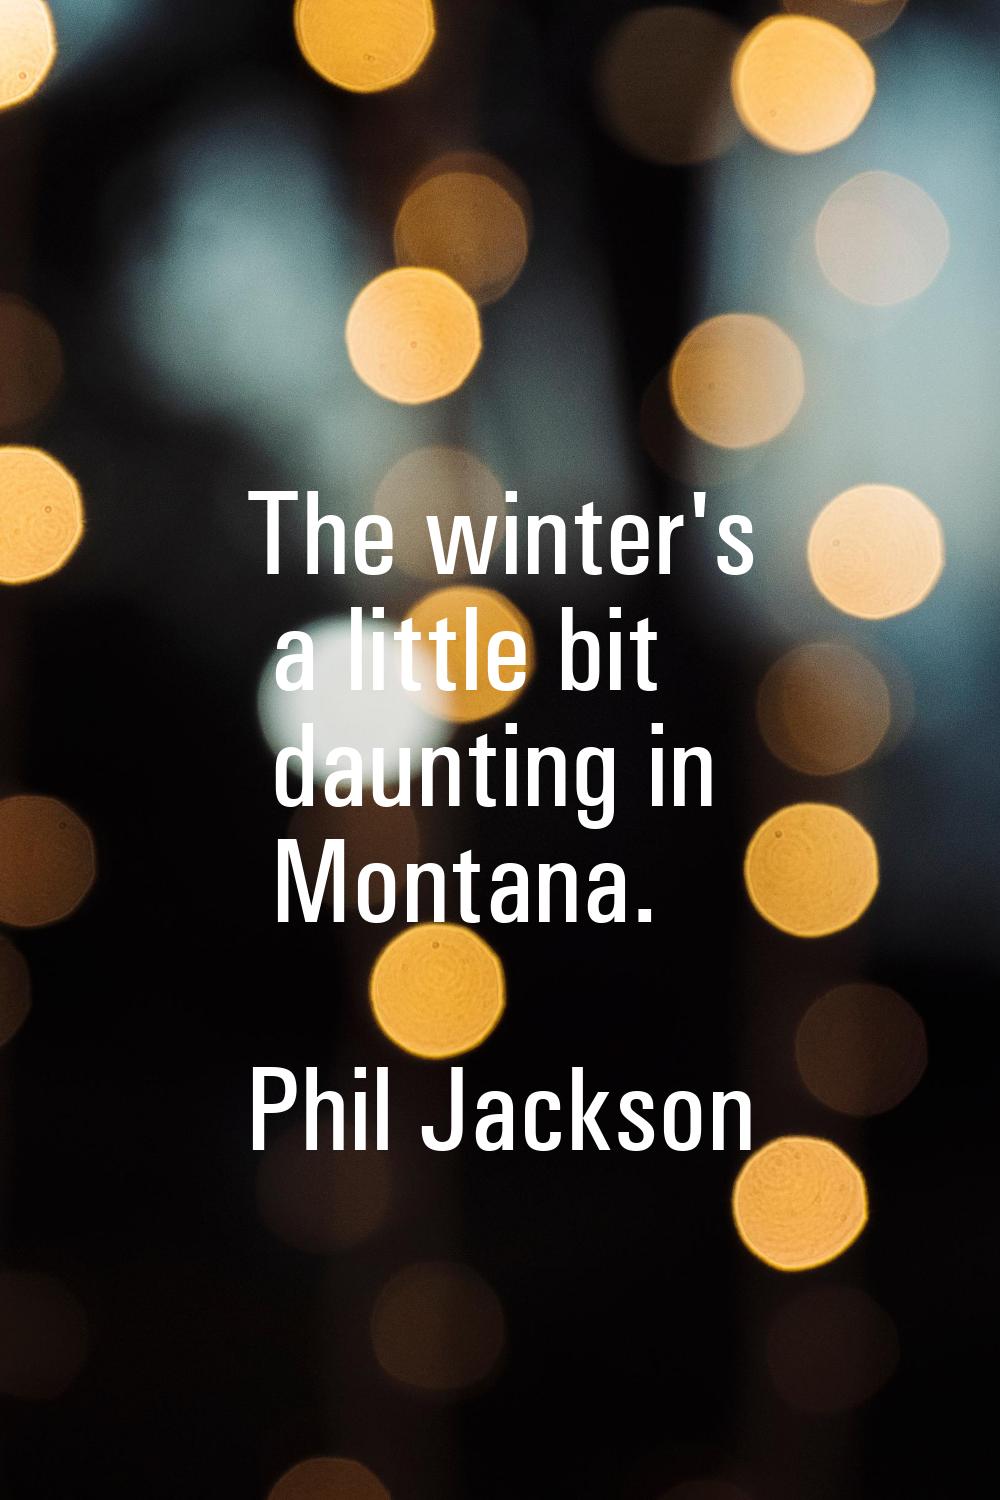 The winter's a little bit daunting in Montana.